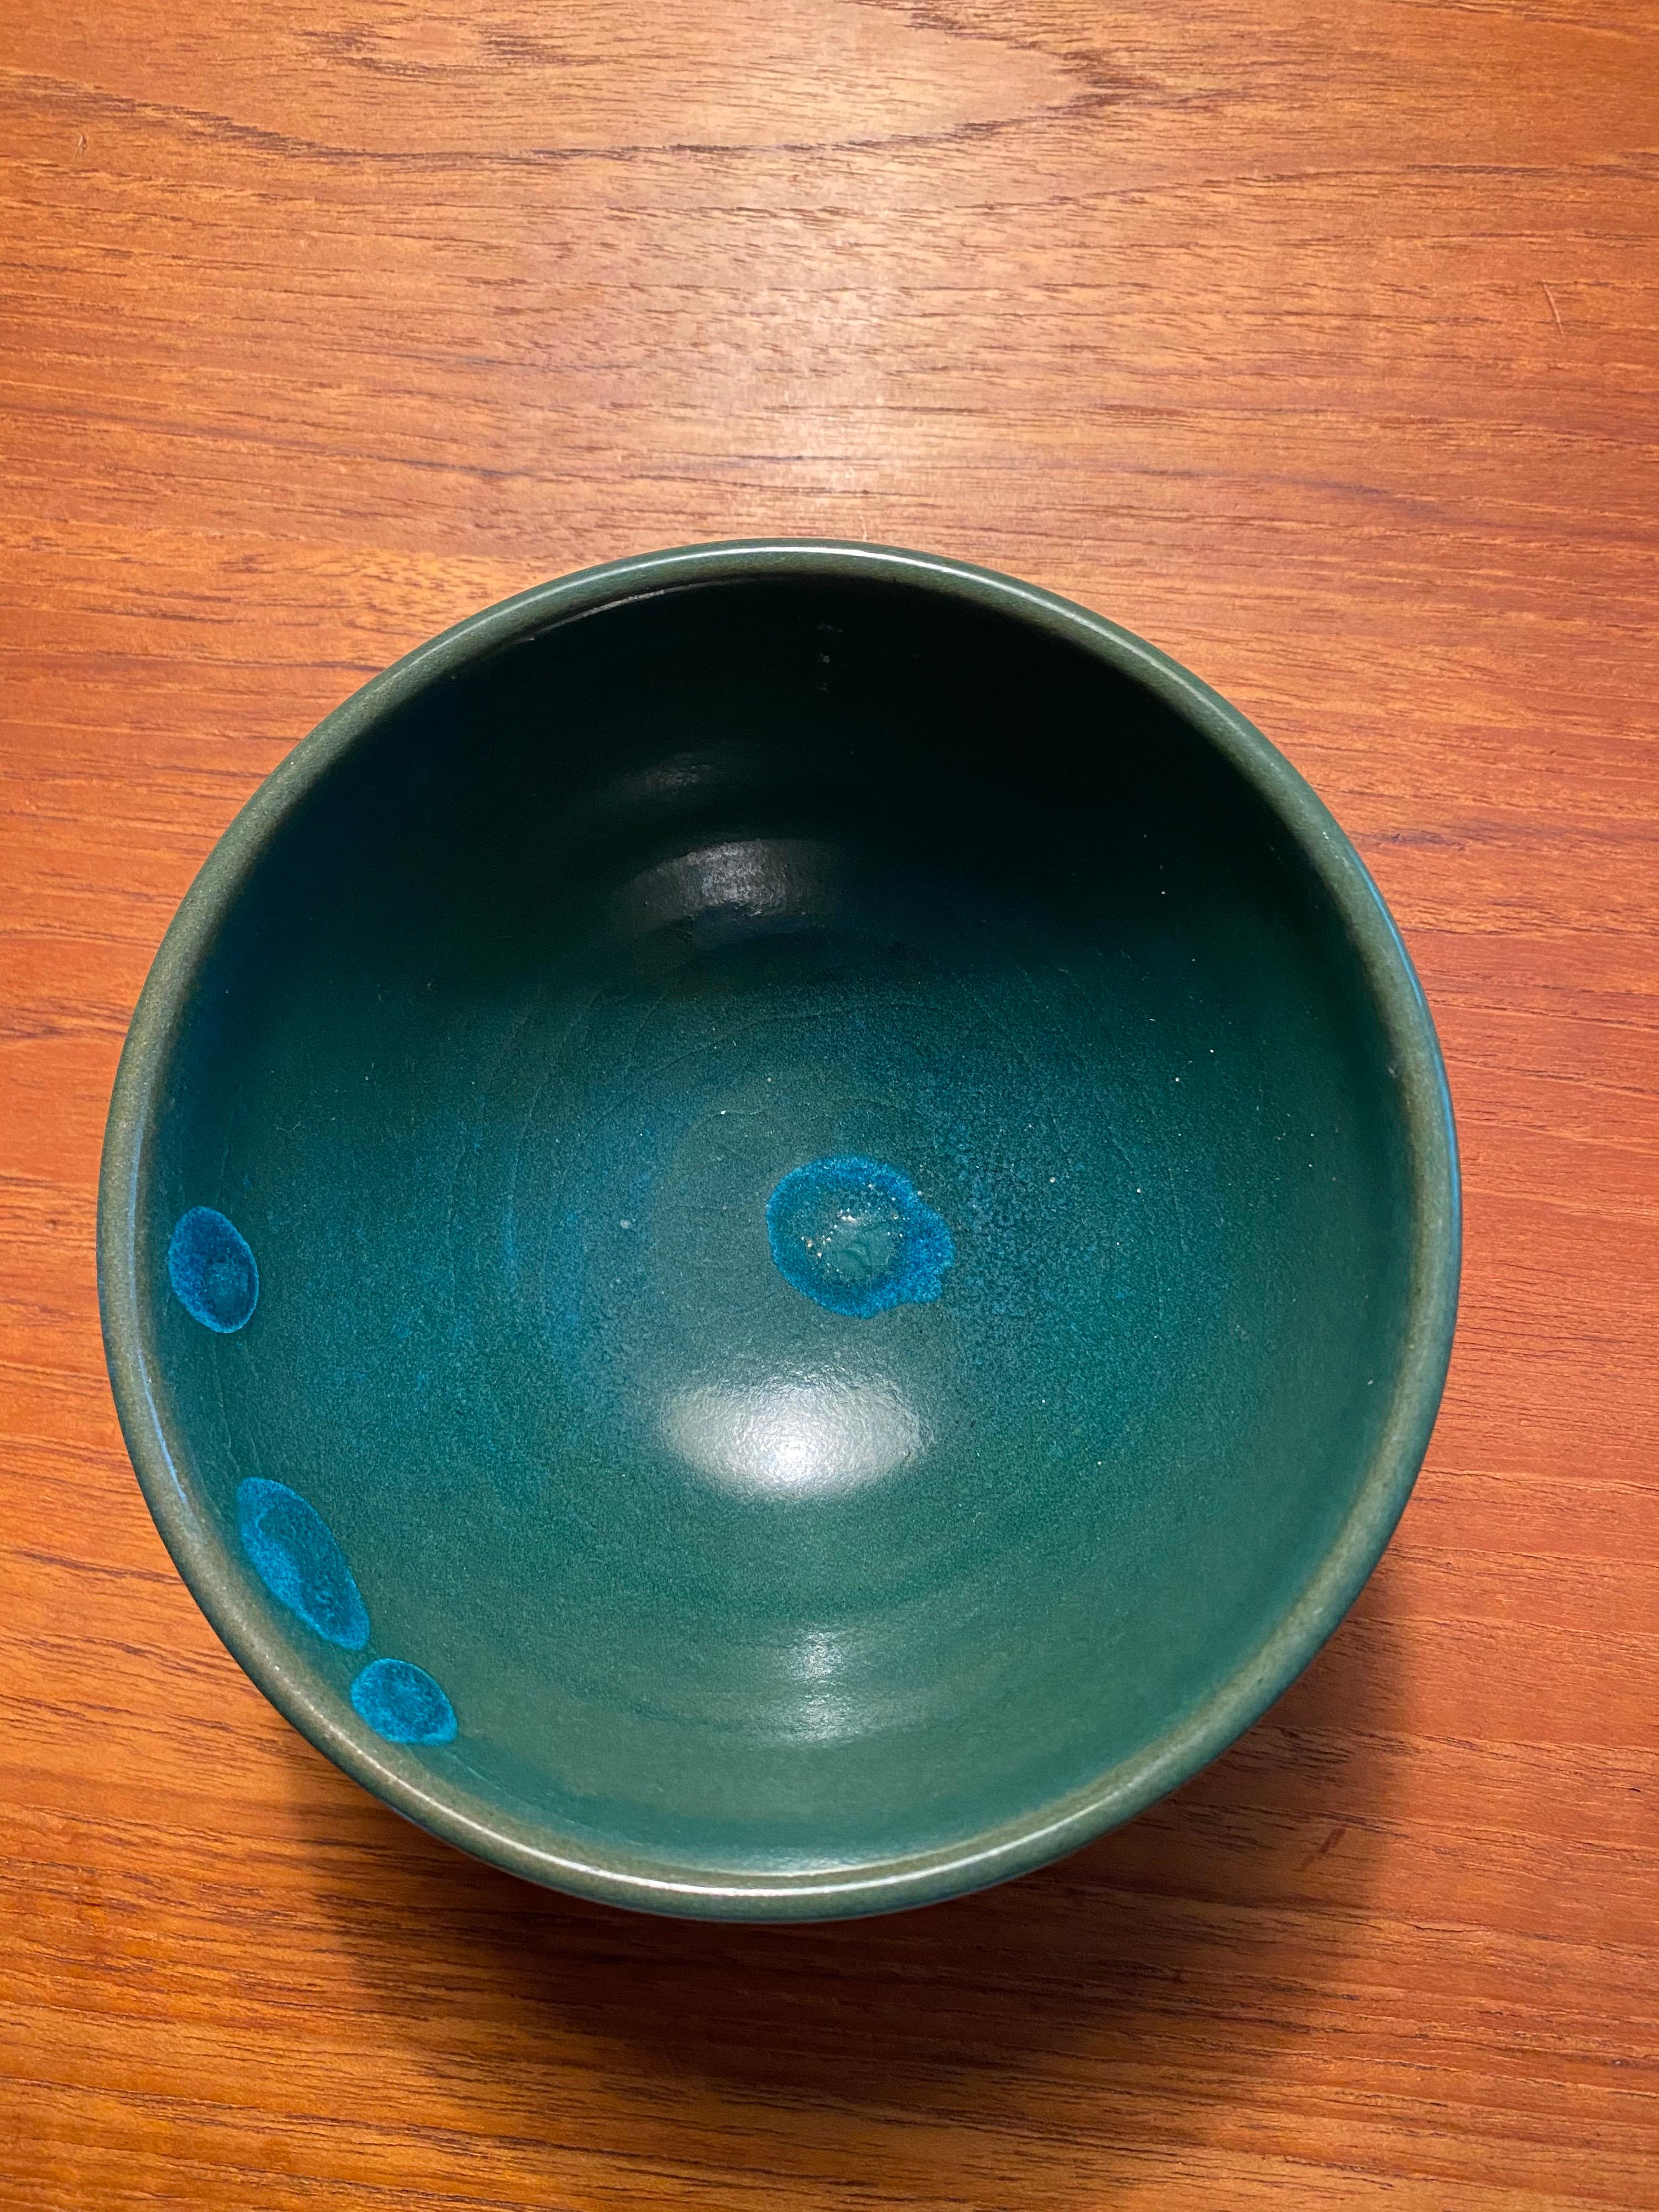 Harding Black ribbed bowl in blue to green, signed and dated 1976 on bottom. The world renowned San Antonio potter was famous for his glazes and this specimen is a fine example. No chips or cracks and perfectly functional for use or display.